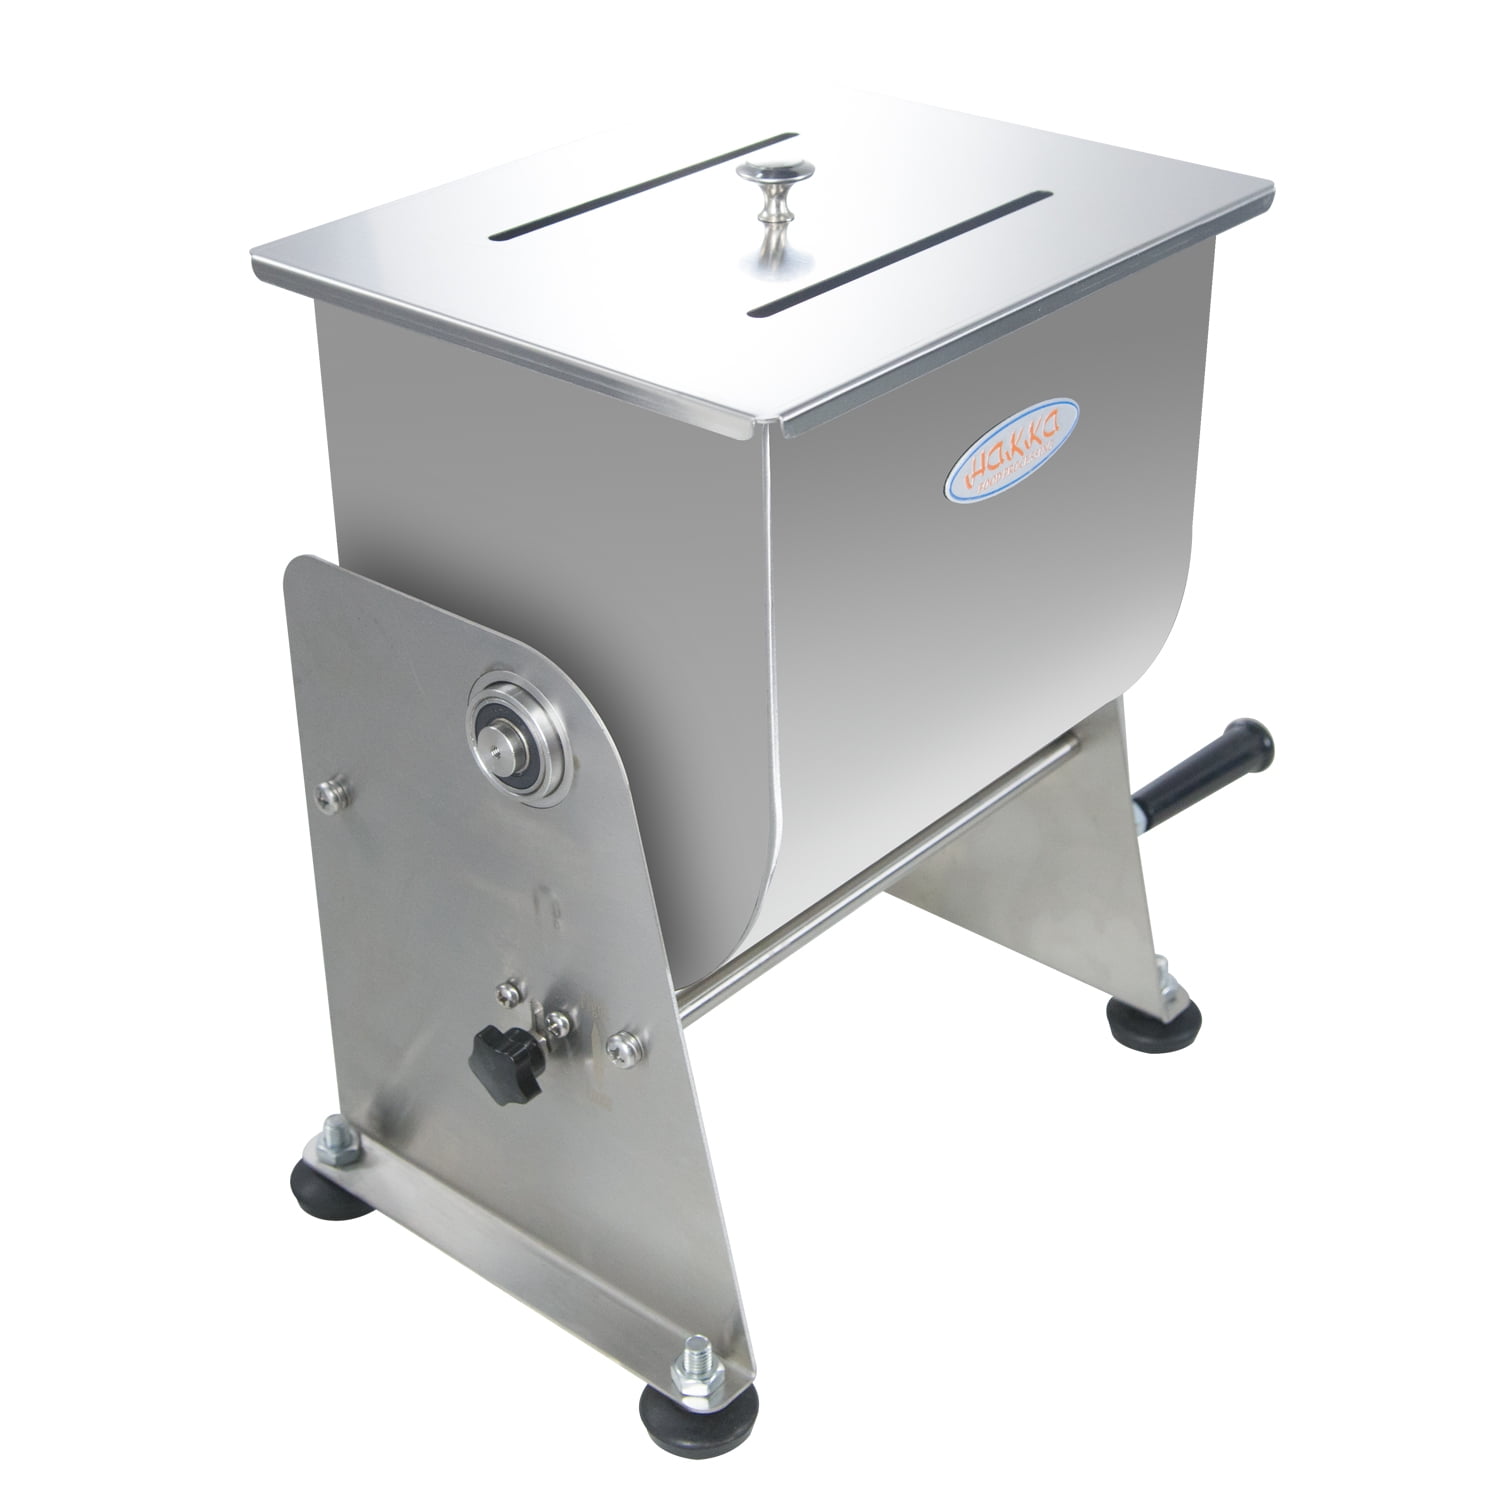 hakka 30L S/S Meat Mixer, Single Shaft, Fixing Tank, Handy Use and Electric  Use (With TC12 Body) FME30 - The Home Depot